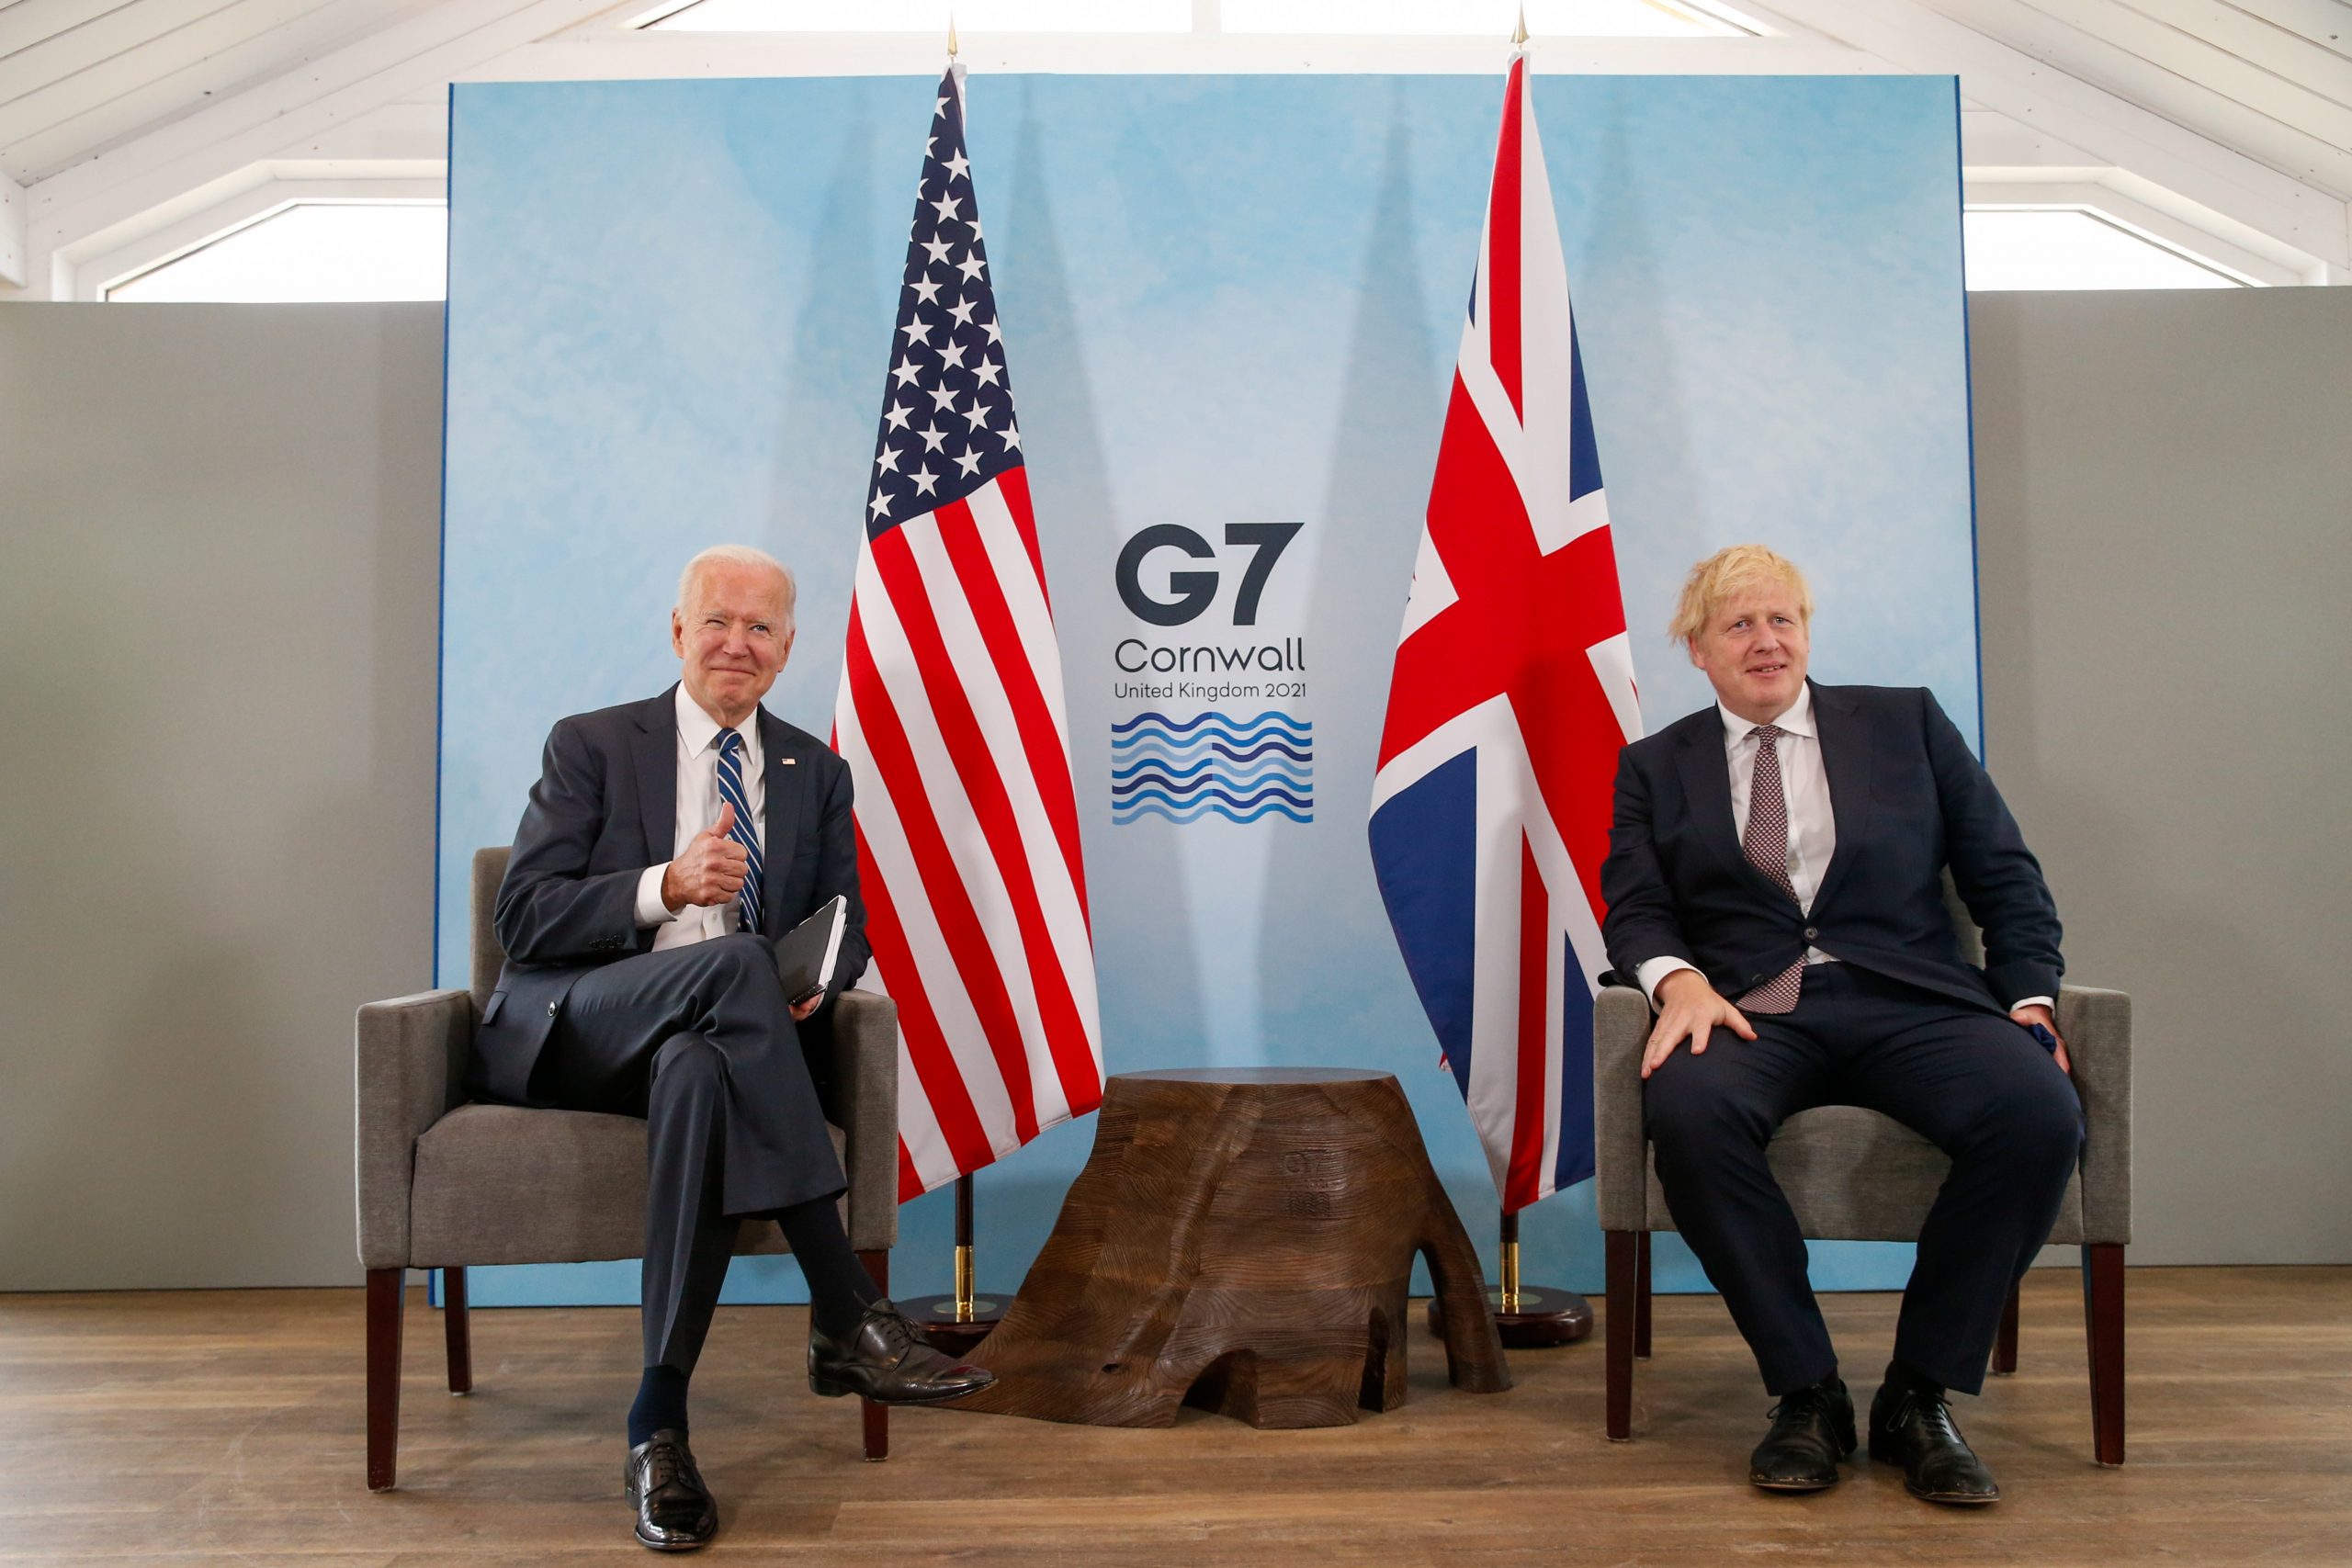 epa09259943 British Prime Minister Boris Johnson (R) during his bilateral meeting with US President Joe Biden (L) in Carbis Bay, Britain, on 10 June 2021. British Prime Minister Boris Johnson is meeting Joe Biden for the first time ahead of the Group of Seven summit that the UK is hosting.  EPA/Hollie Adams / POOL